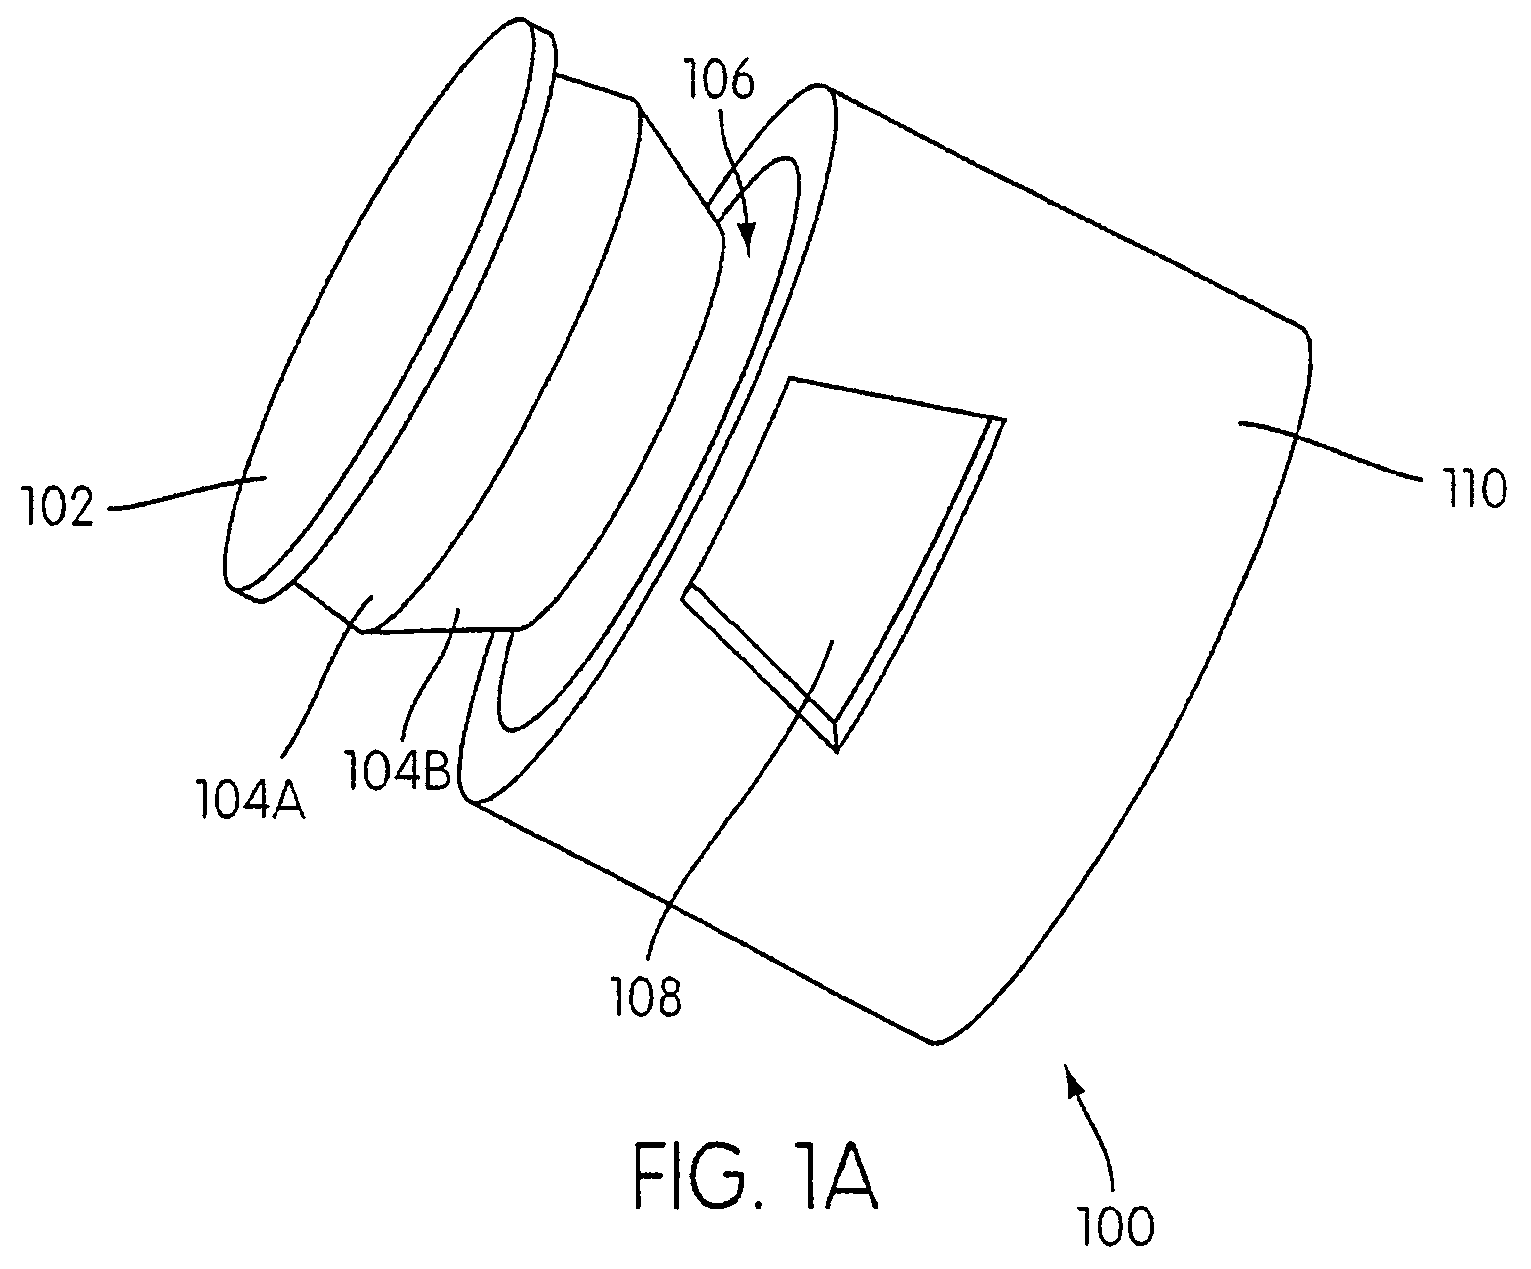 Vent and/or diverter assembly for use in breathing apparatus